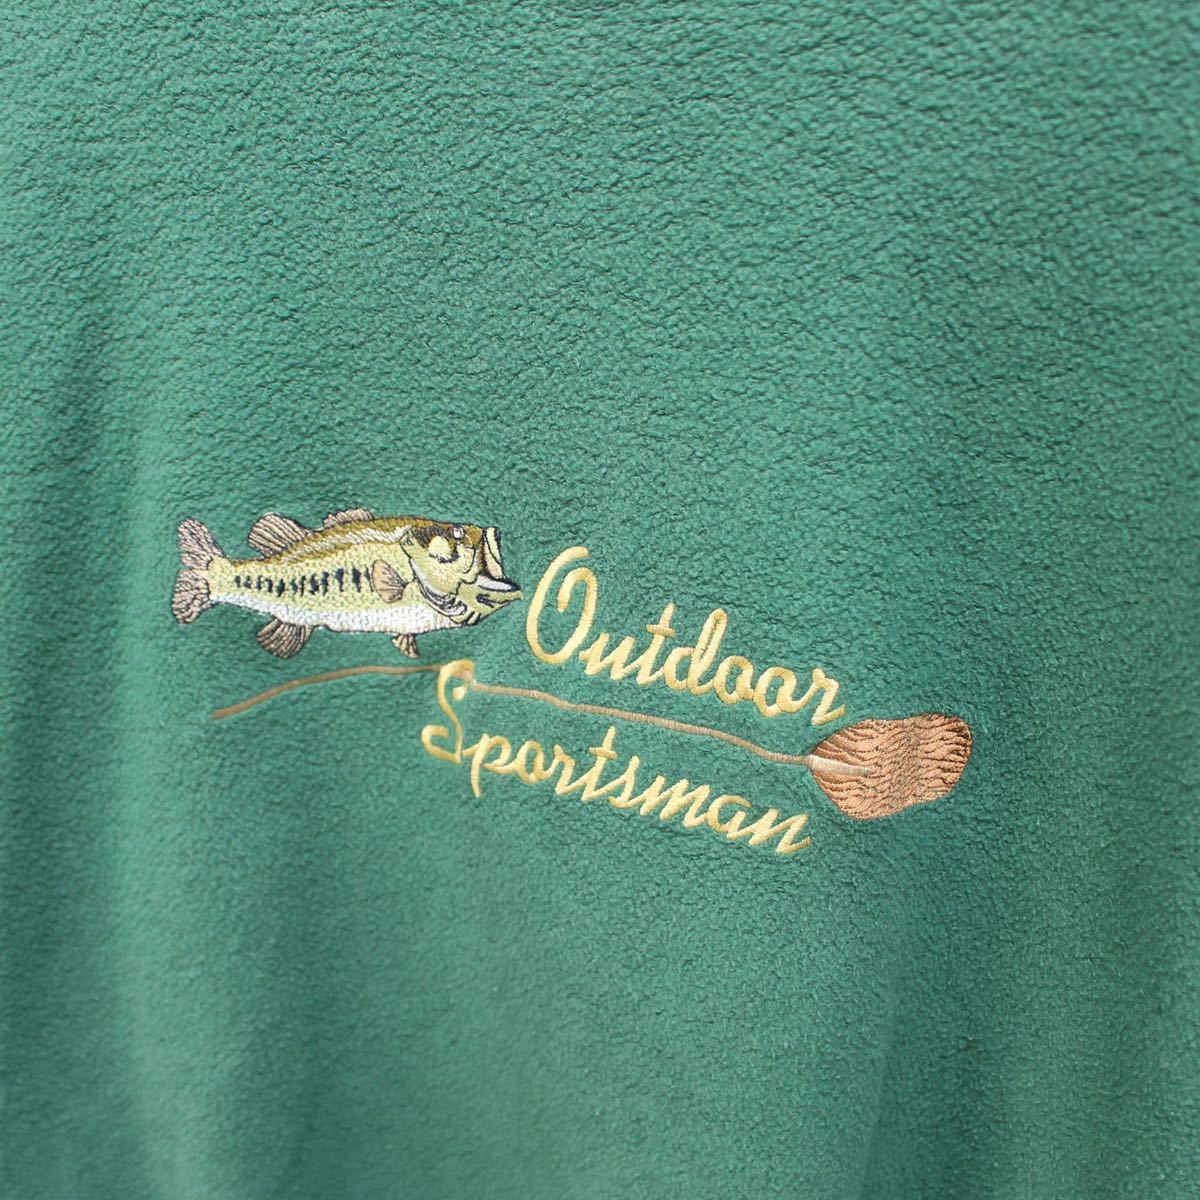 USA VINTAGE CABLE SPORTSWEAR FISHING EMBROIDERY DESIGN SWEAT/アメリカ古着釣り刺繍スウェット